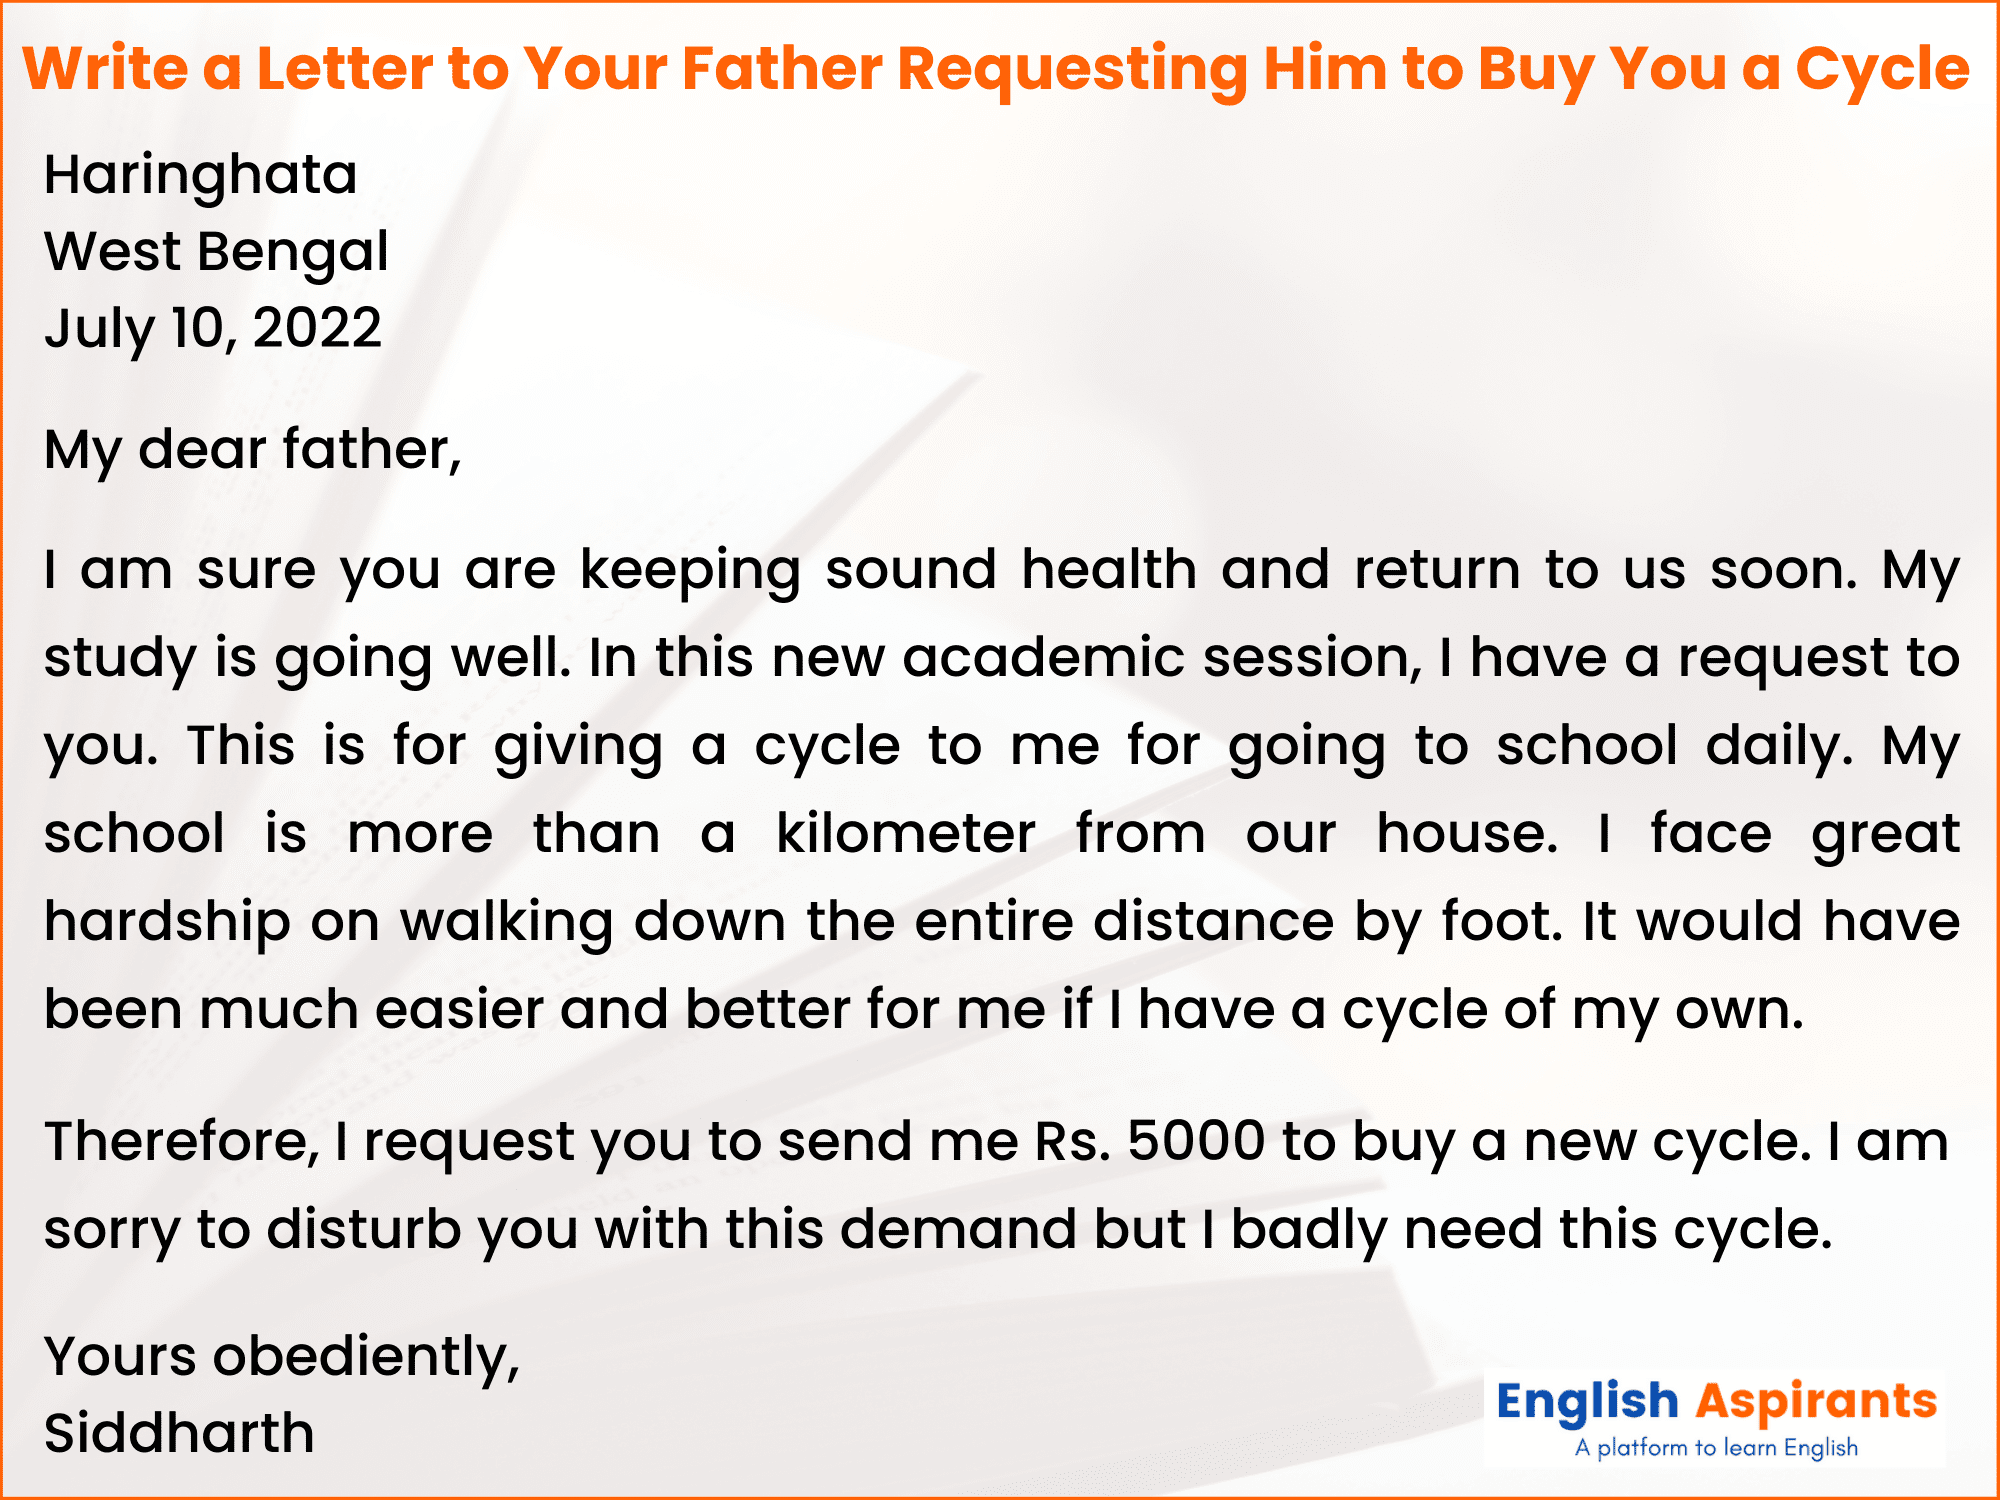 Write a Letter to Your Father Requesting Him to Buy You a Cycle